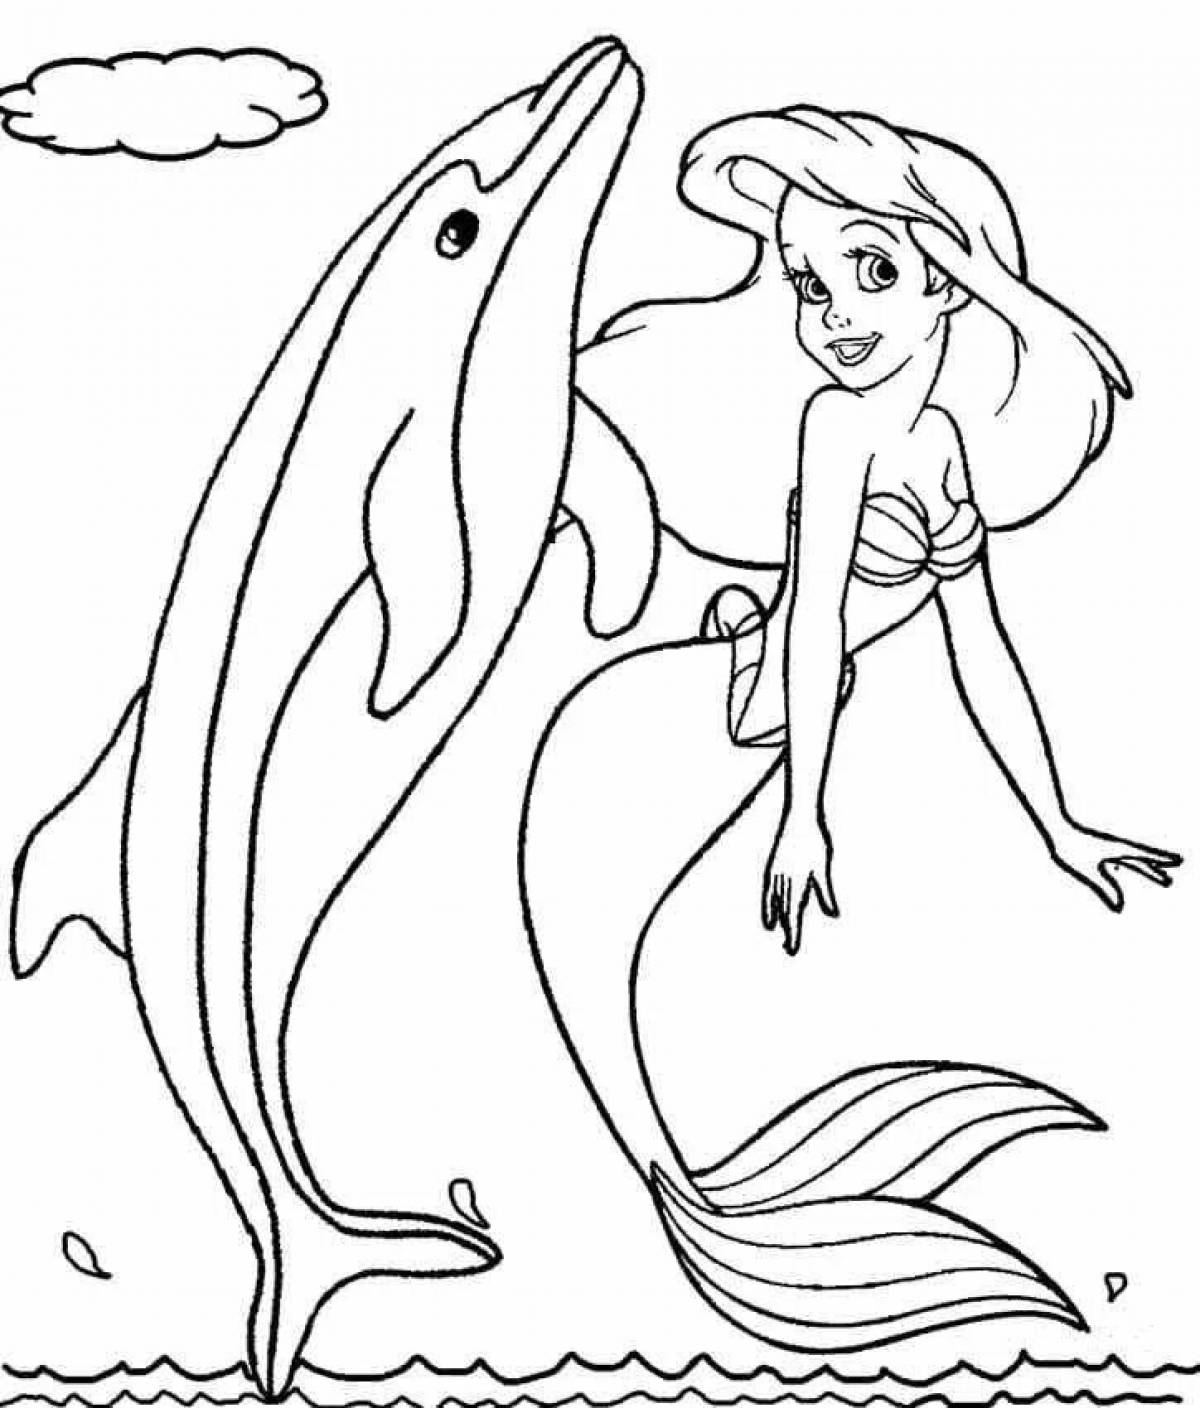 Great mermaid coloring book for 4-5 year olds